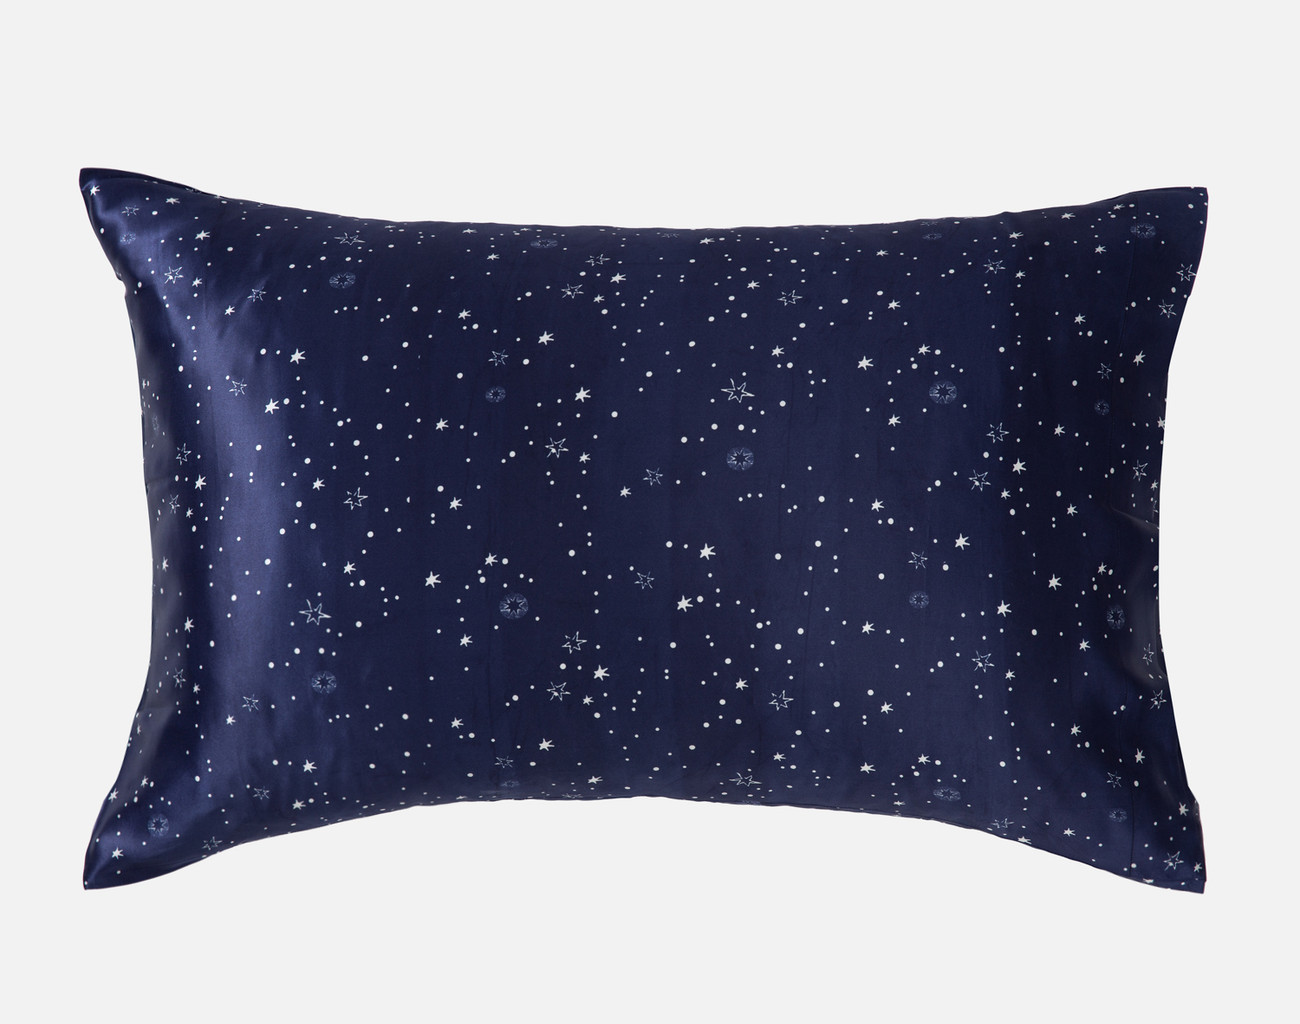 100% Mulberry Silk Pillowcase - Starry Night (Sold Individually)